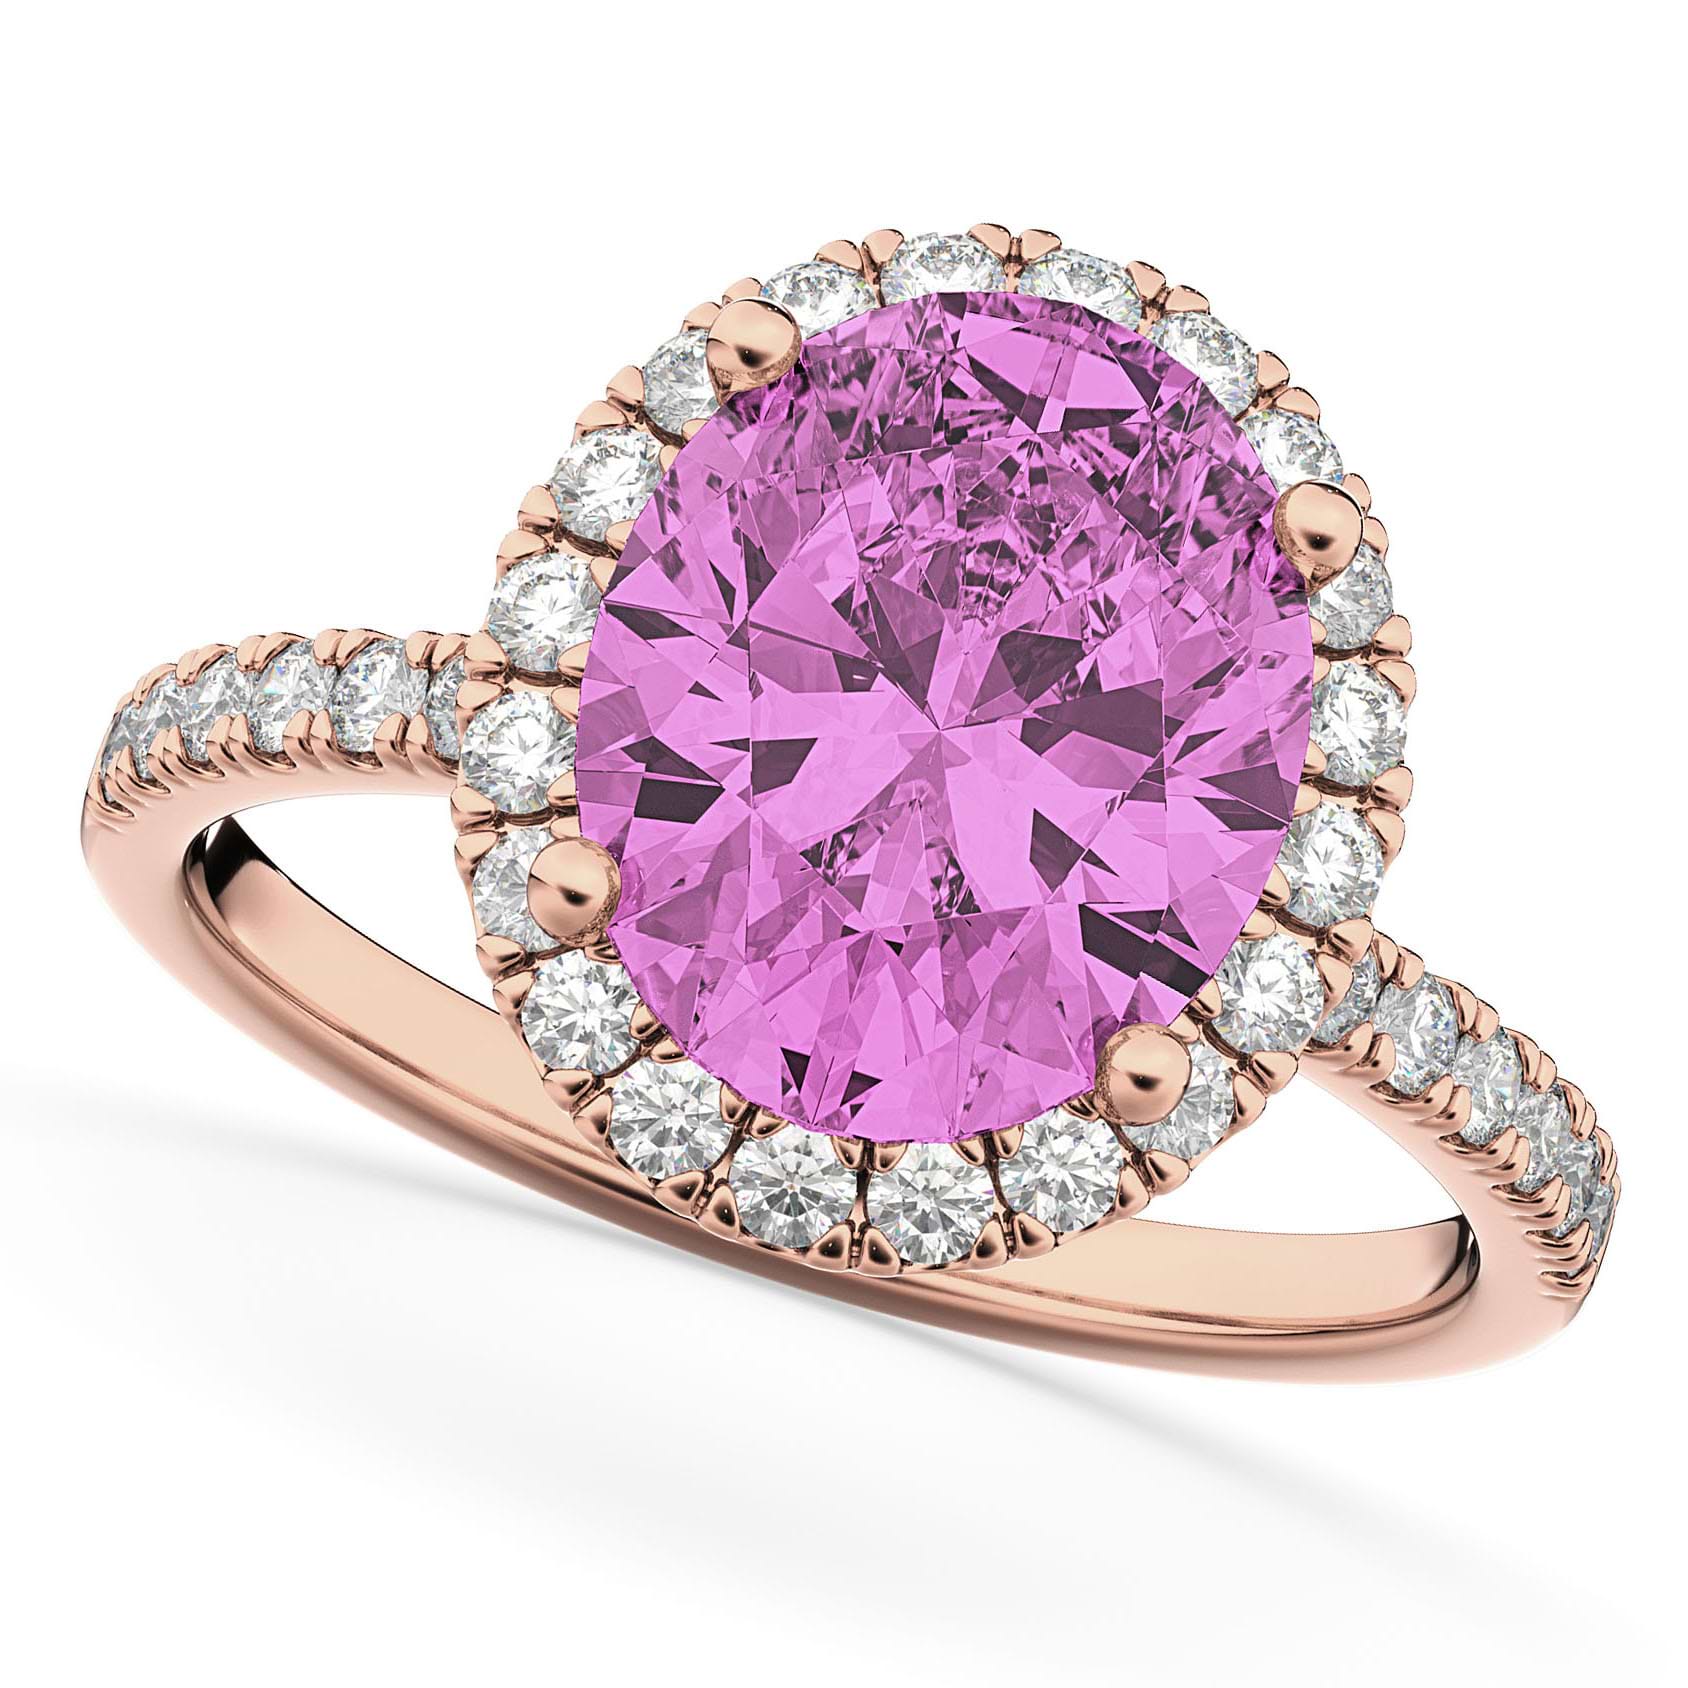 Oval Cut Halo Pink Sapphire & Diamond Engagement Ring 14K Rose Gold 3.66ct